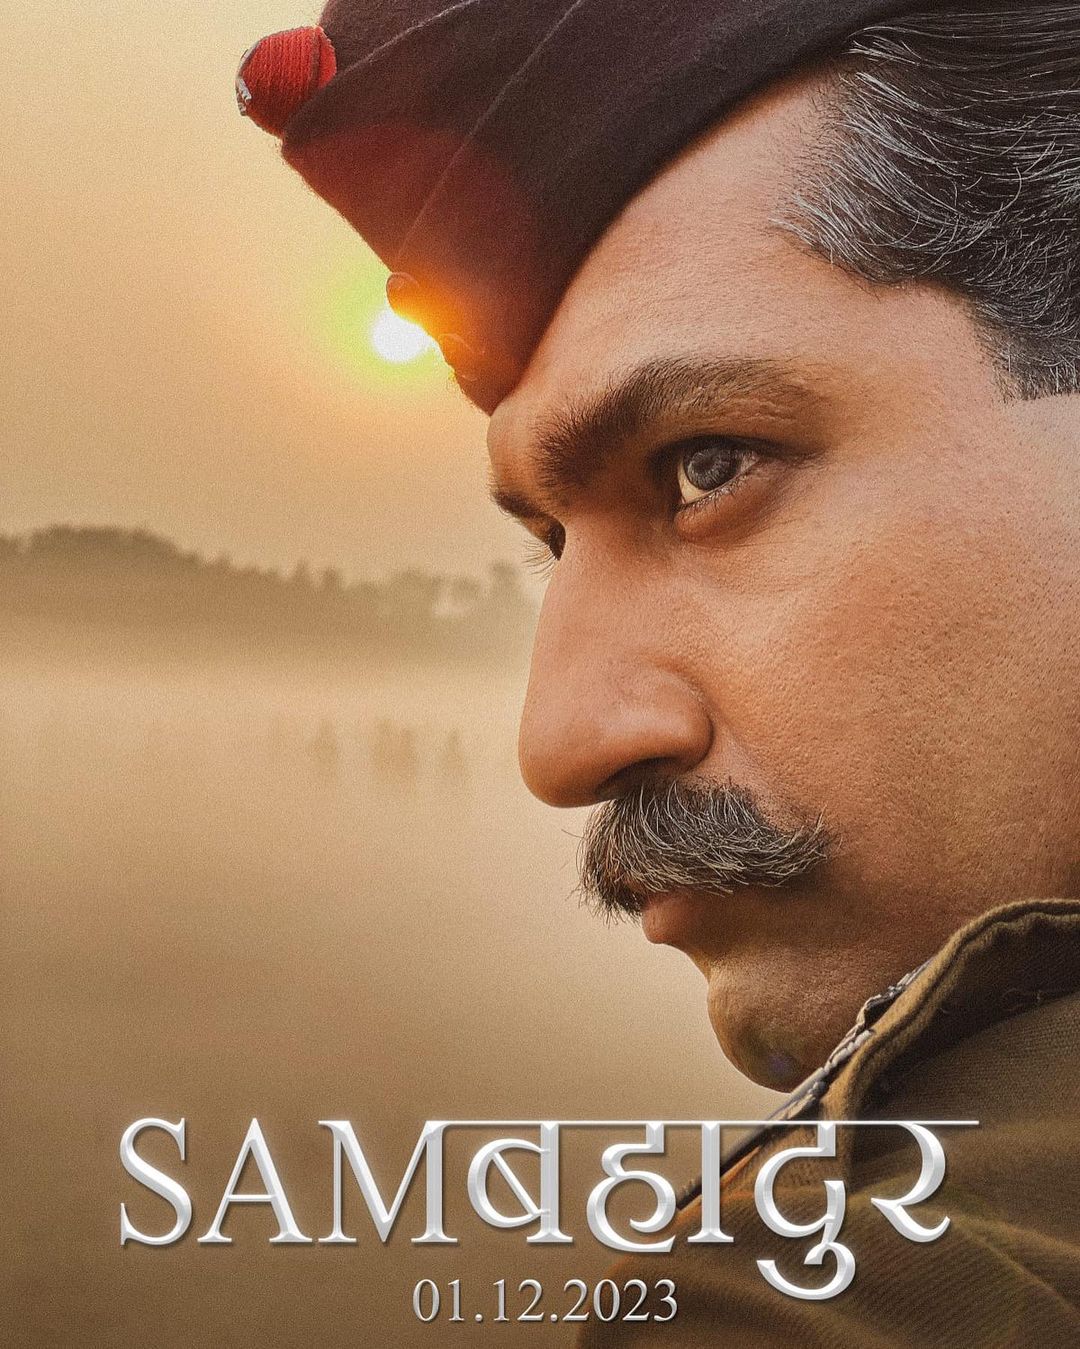 Vicky Kaushal in the new poster of Sam Bahadur